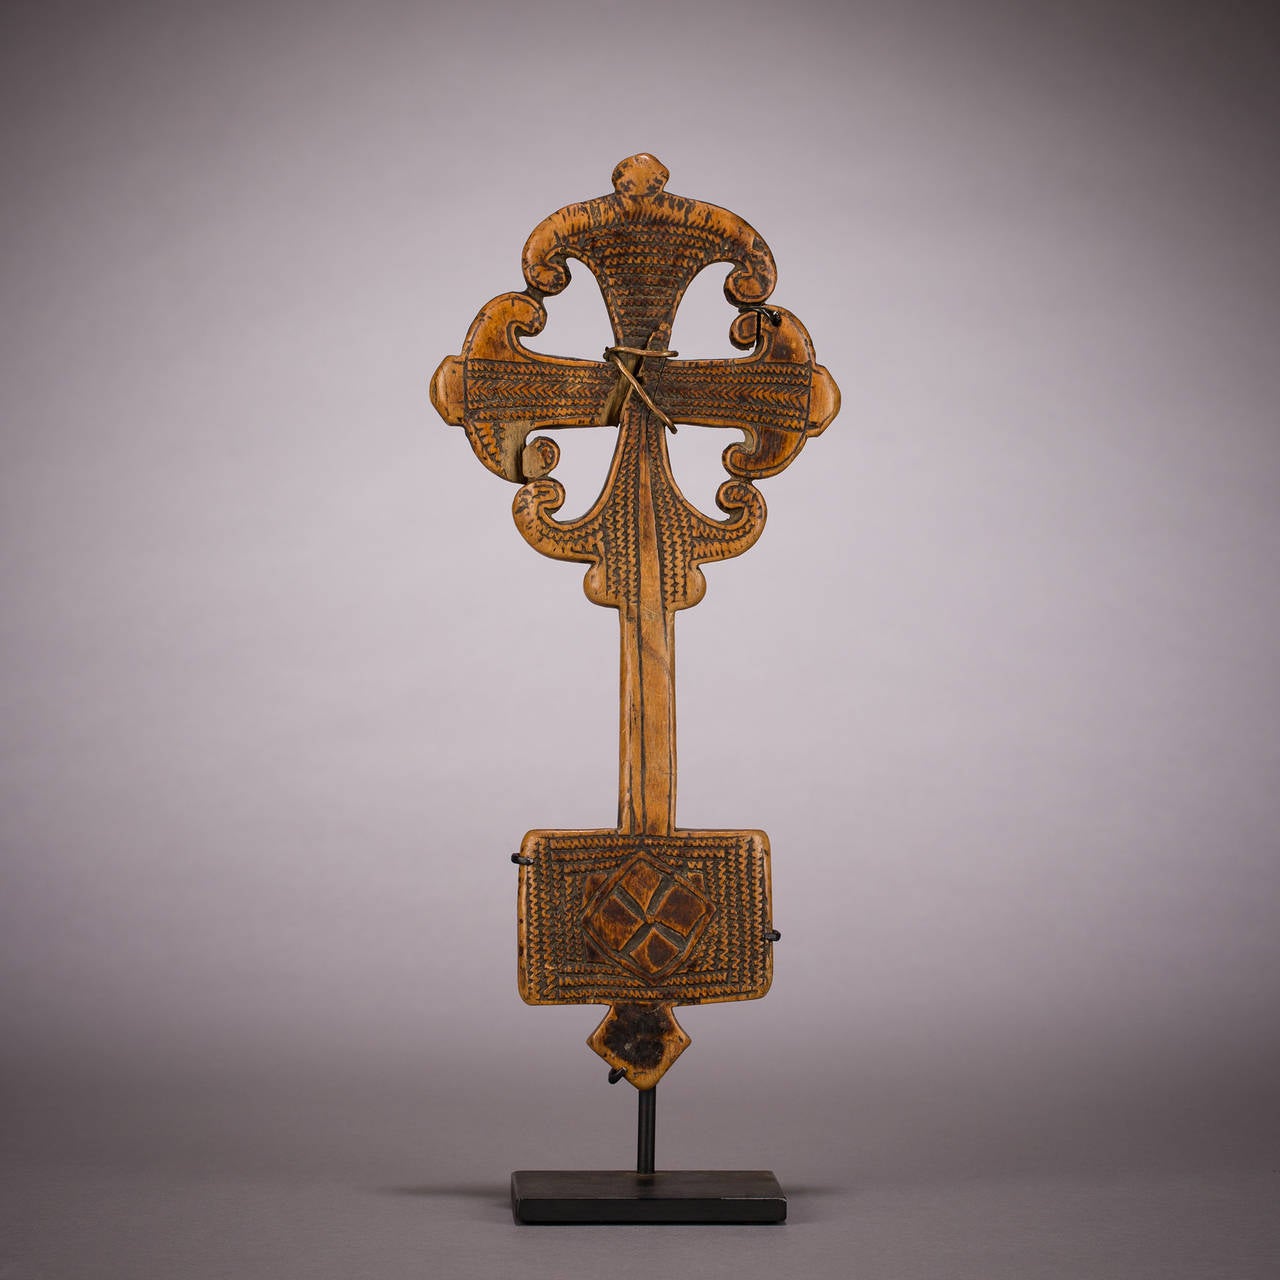 A beautiful ‘Horn of Lamb of God’ wooden hand cross from Shoa, Ethiopia, circa 1780-1830.

Ethiopian hand crosses are coveted by collectors of medieval art, religious art and tribal art for their beauty and variety of forms.

Ethiopia was